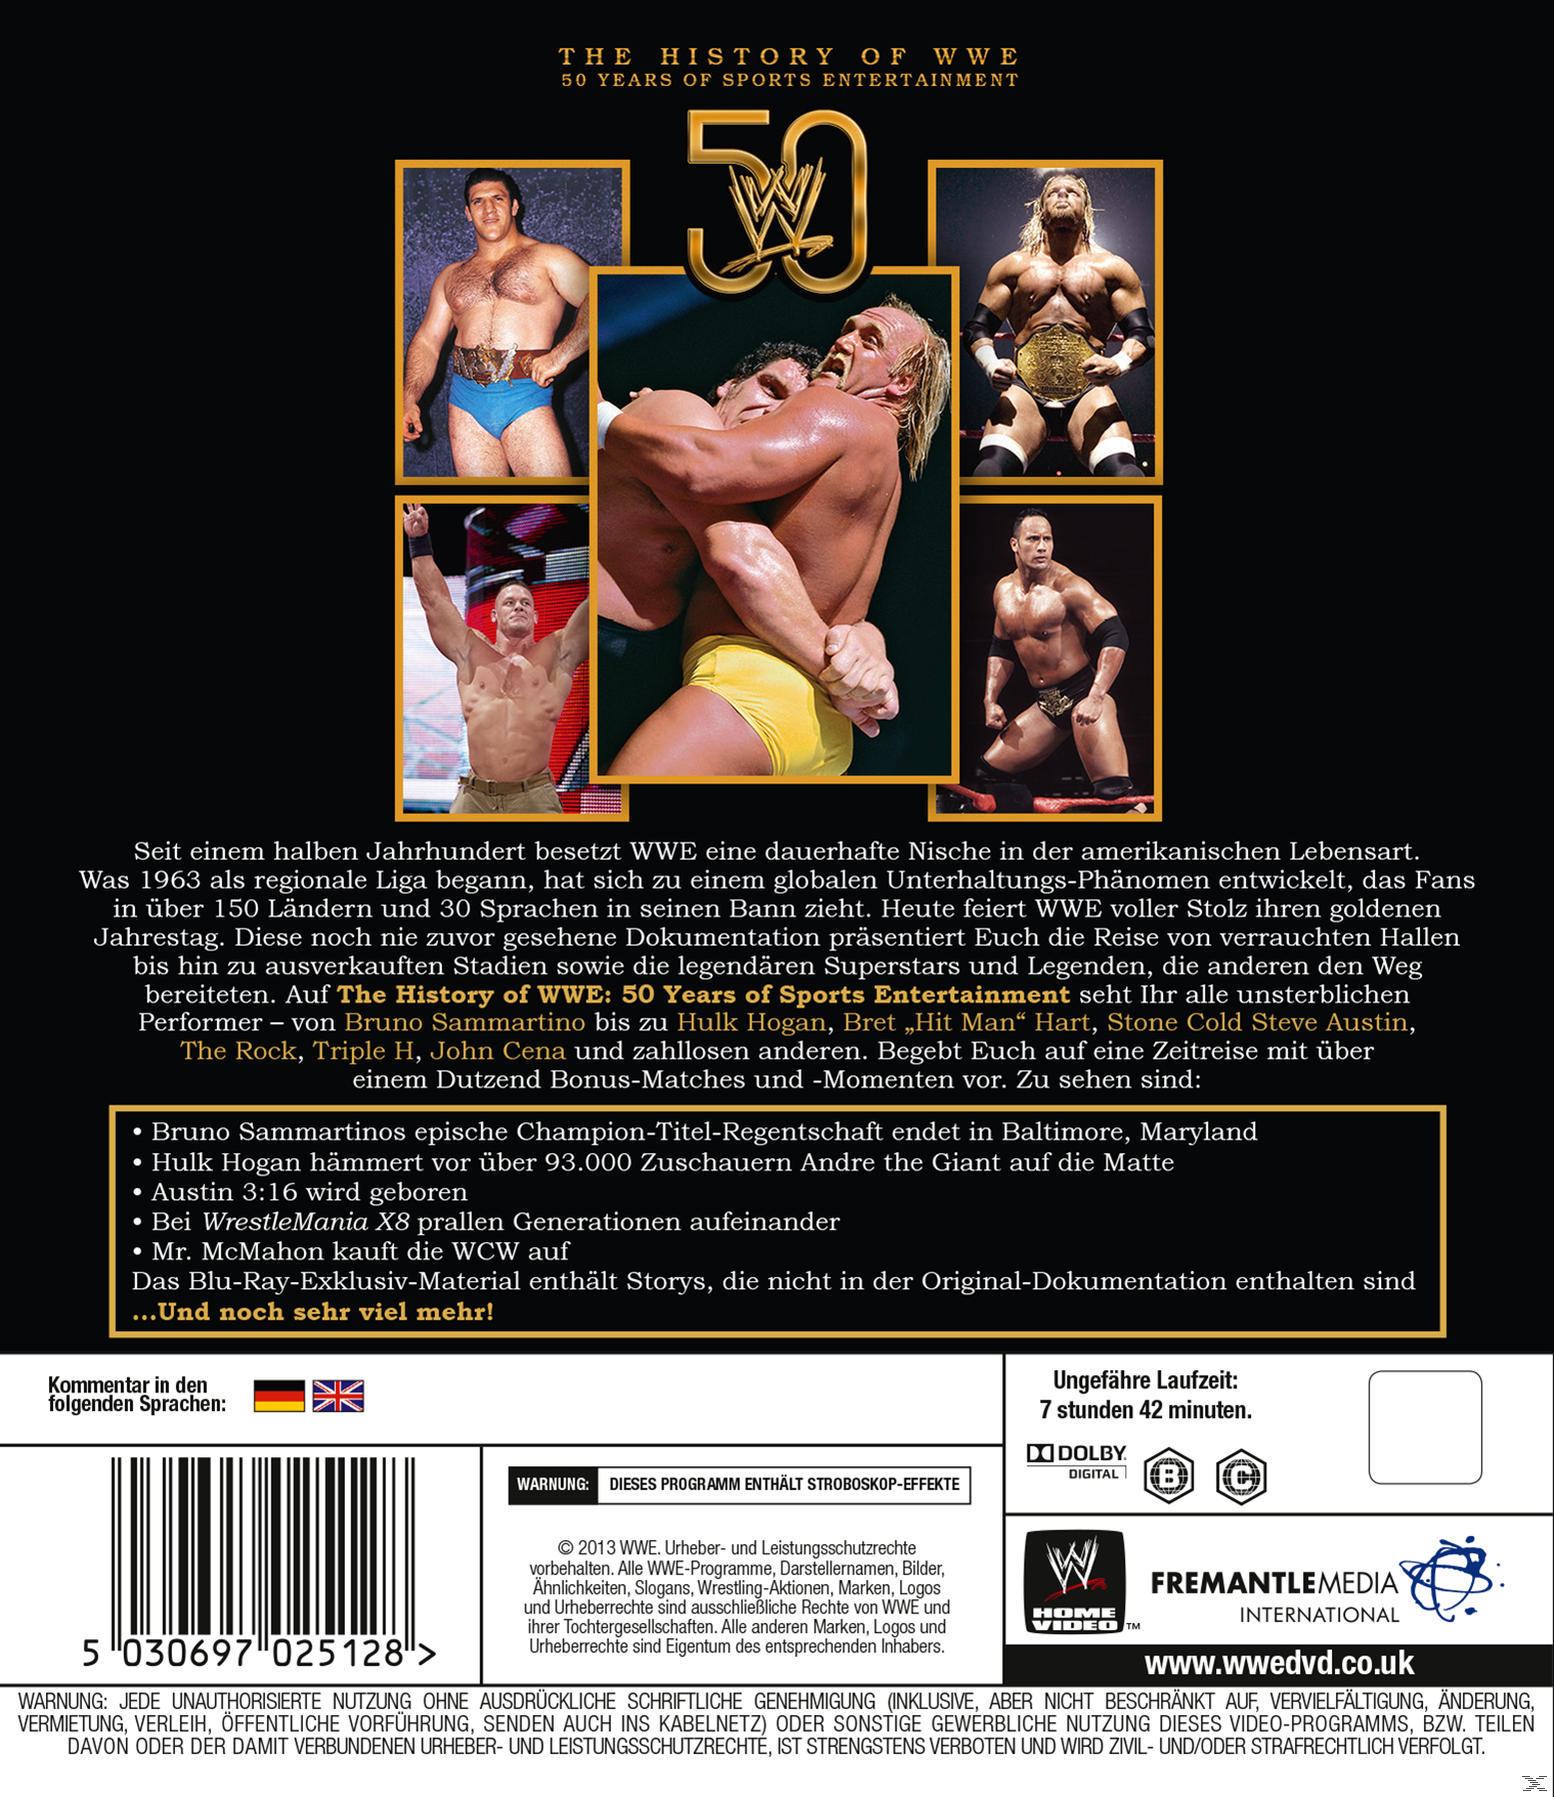 50 WWE: entertainment of History The years sports of Blu-ray